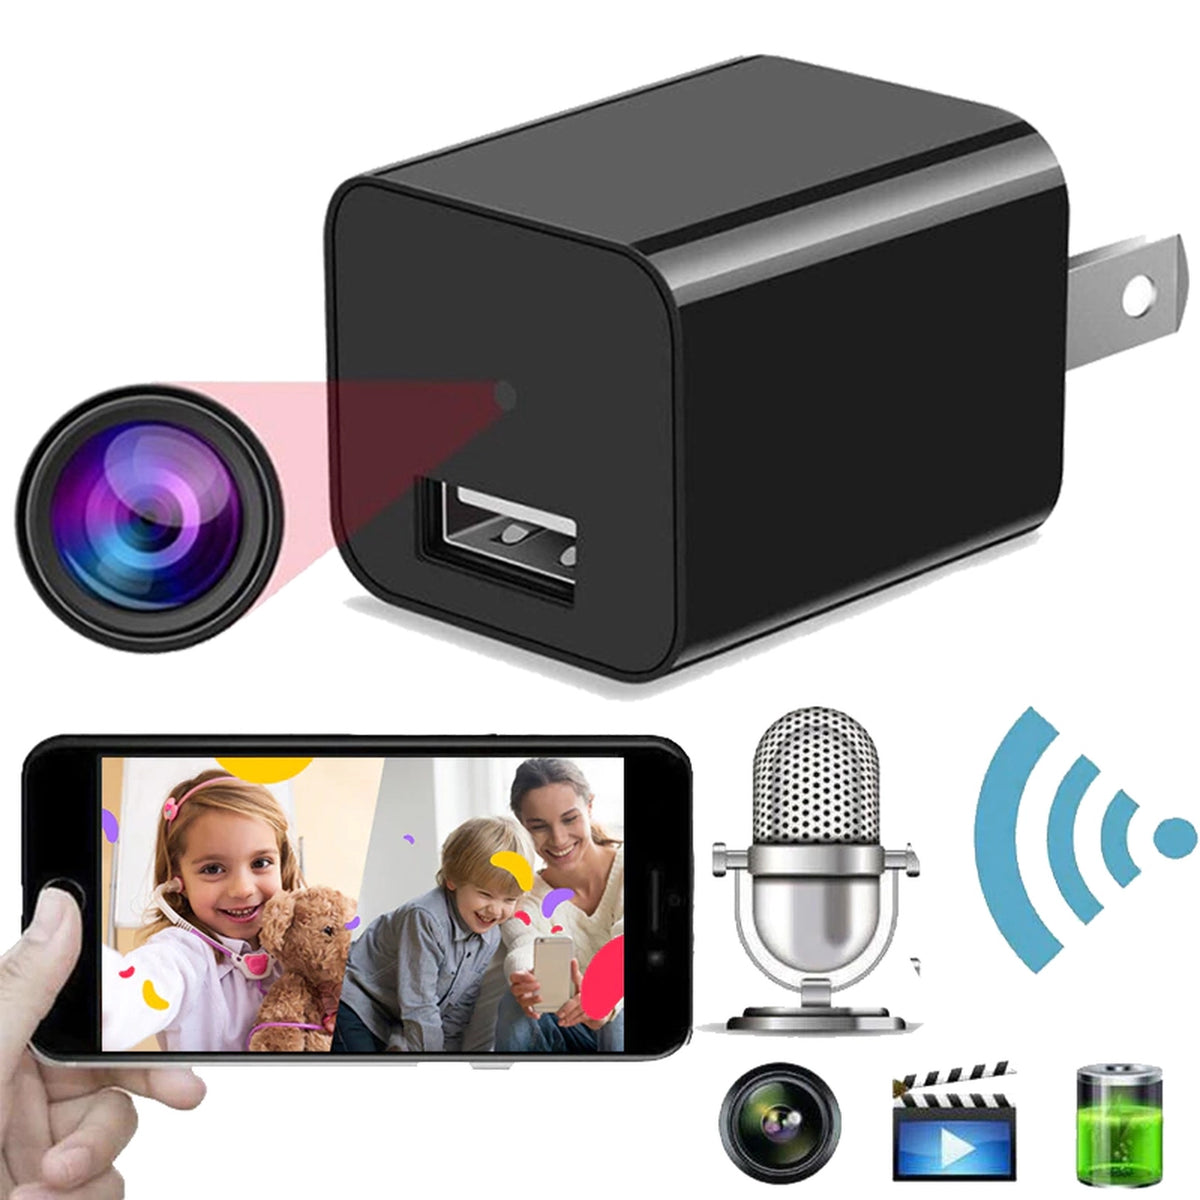 Wall Charger with Camera -USB Charger WiFi Camera Wall Plug iOS or Android